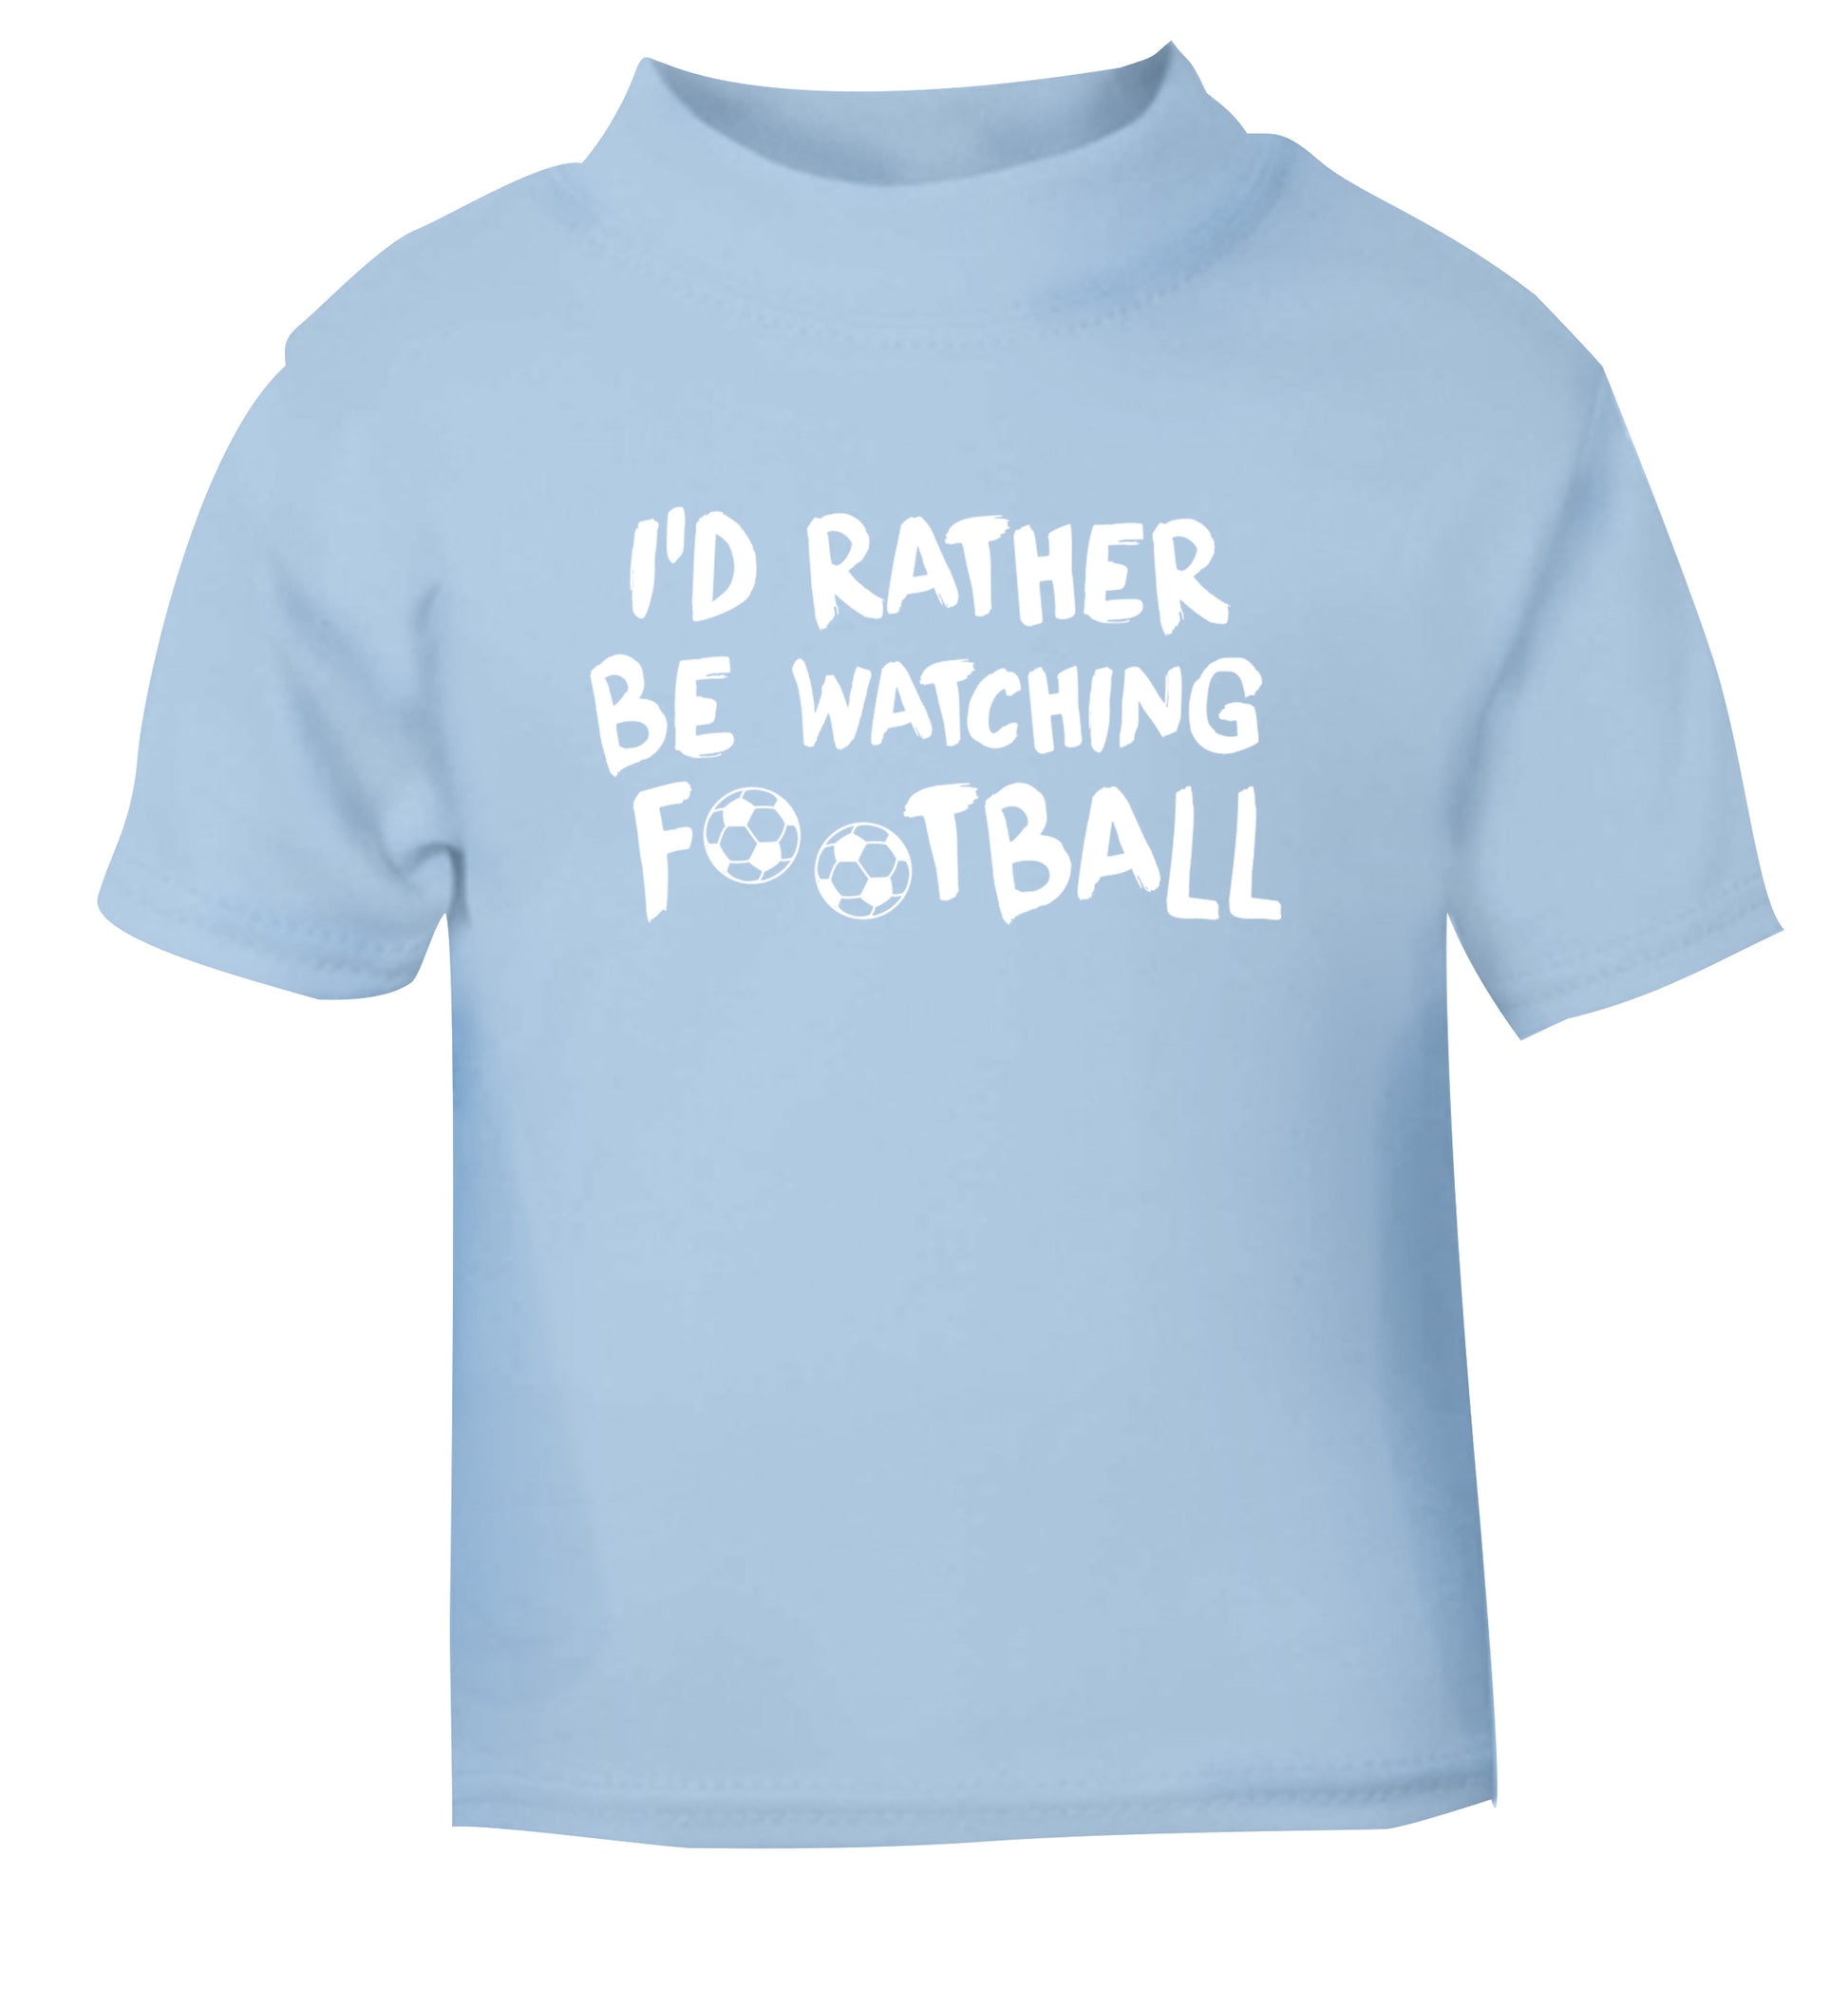 I'd rather be watching football light blue Baby Toddler Tshirt 2 Years